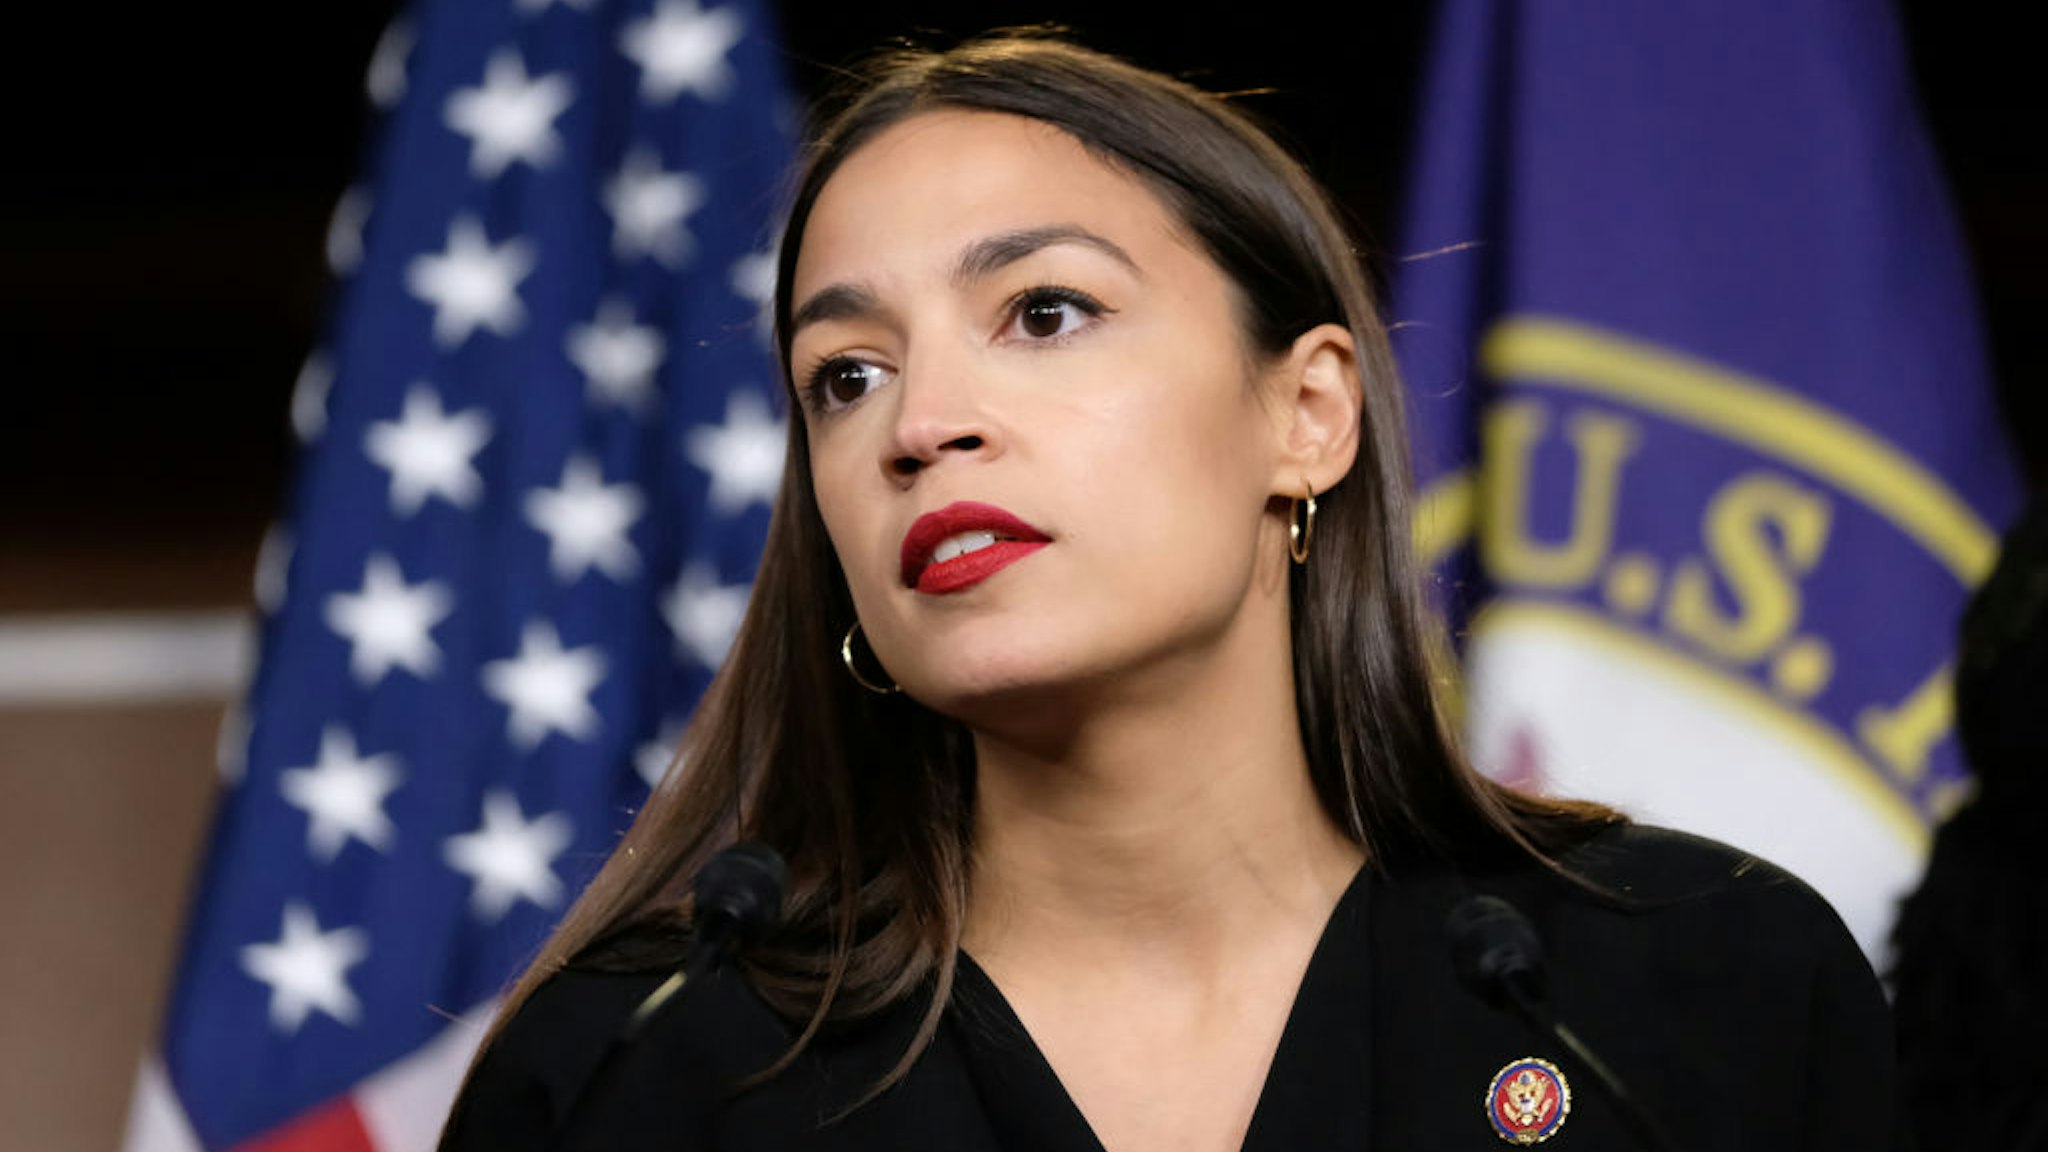 WASHINGTON, DC - JULY 15: U.S. Rep. Alexandria Ocasio-Cortez (D-NY) pauses while speaking during a press conference at the U.S. Capitol on July 15, 2019 in Washington, DC. President Donald Trump stepped up his attacks on four progressive Democratic congresswomen, saying if they're not happy in the United States "they can leave." (Photo by Alex Wroblewski/Getty Images)